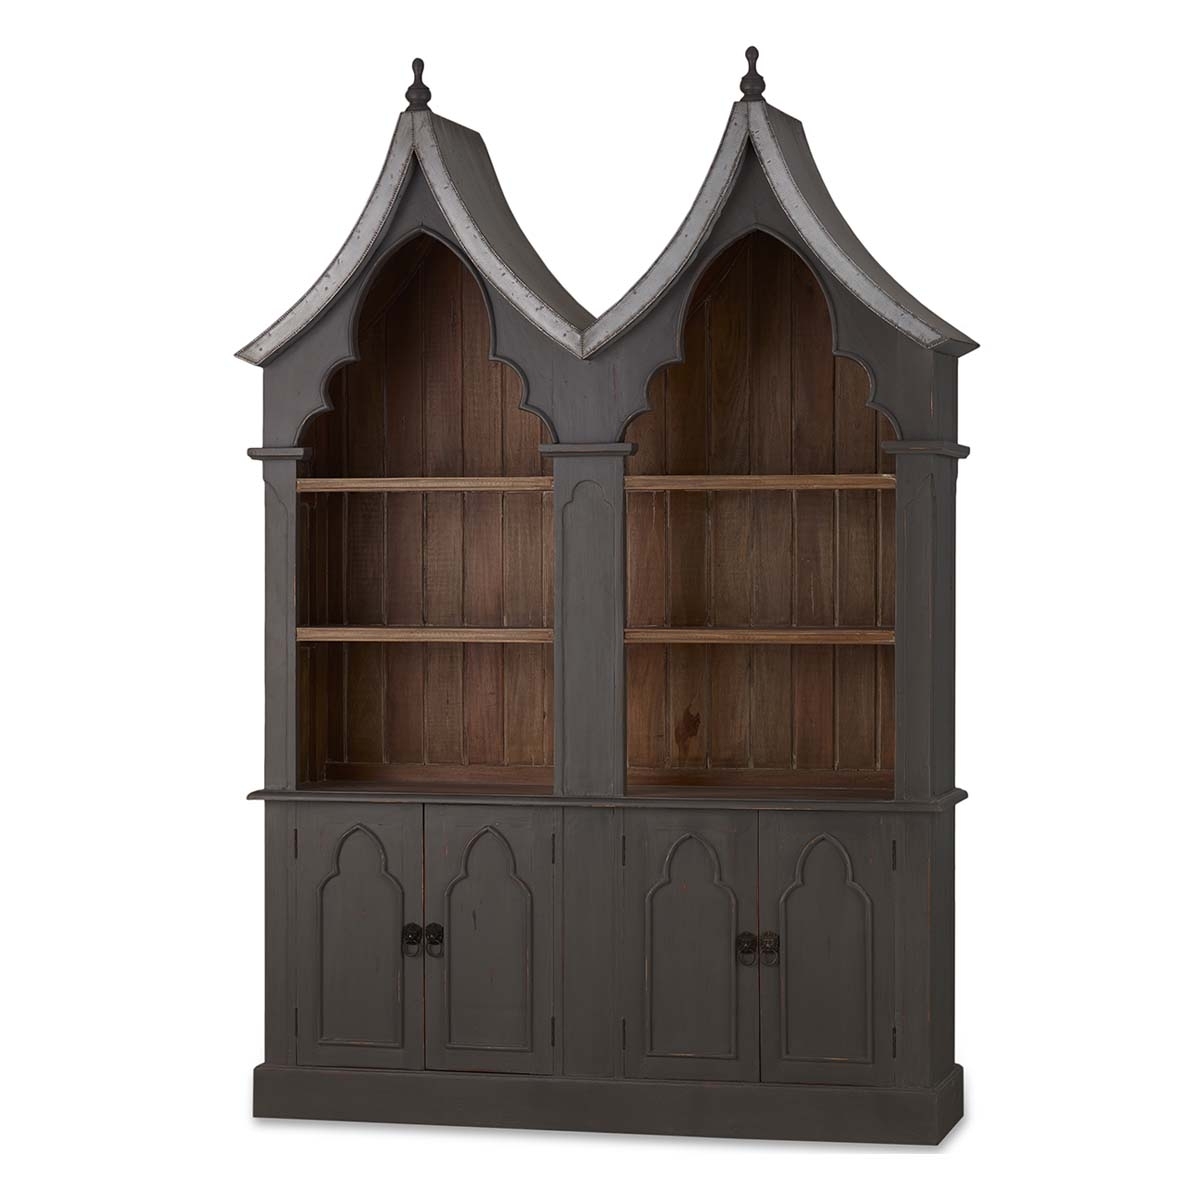 Gothic Conservatory Cabinet